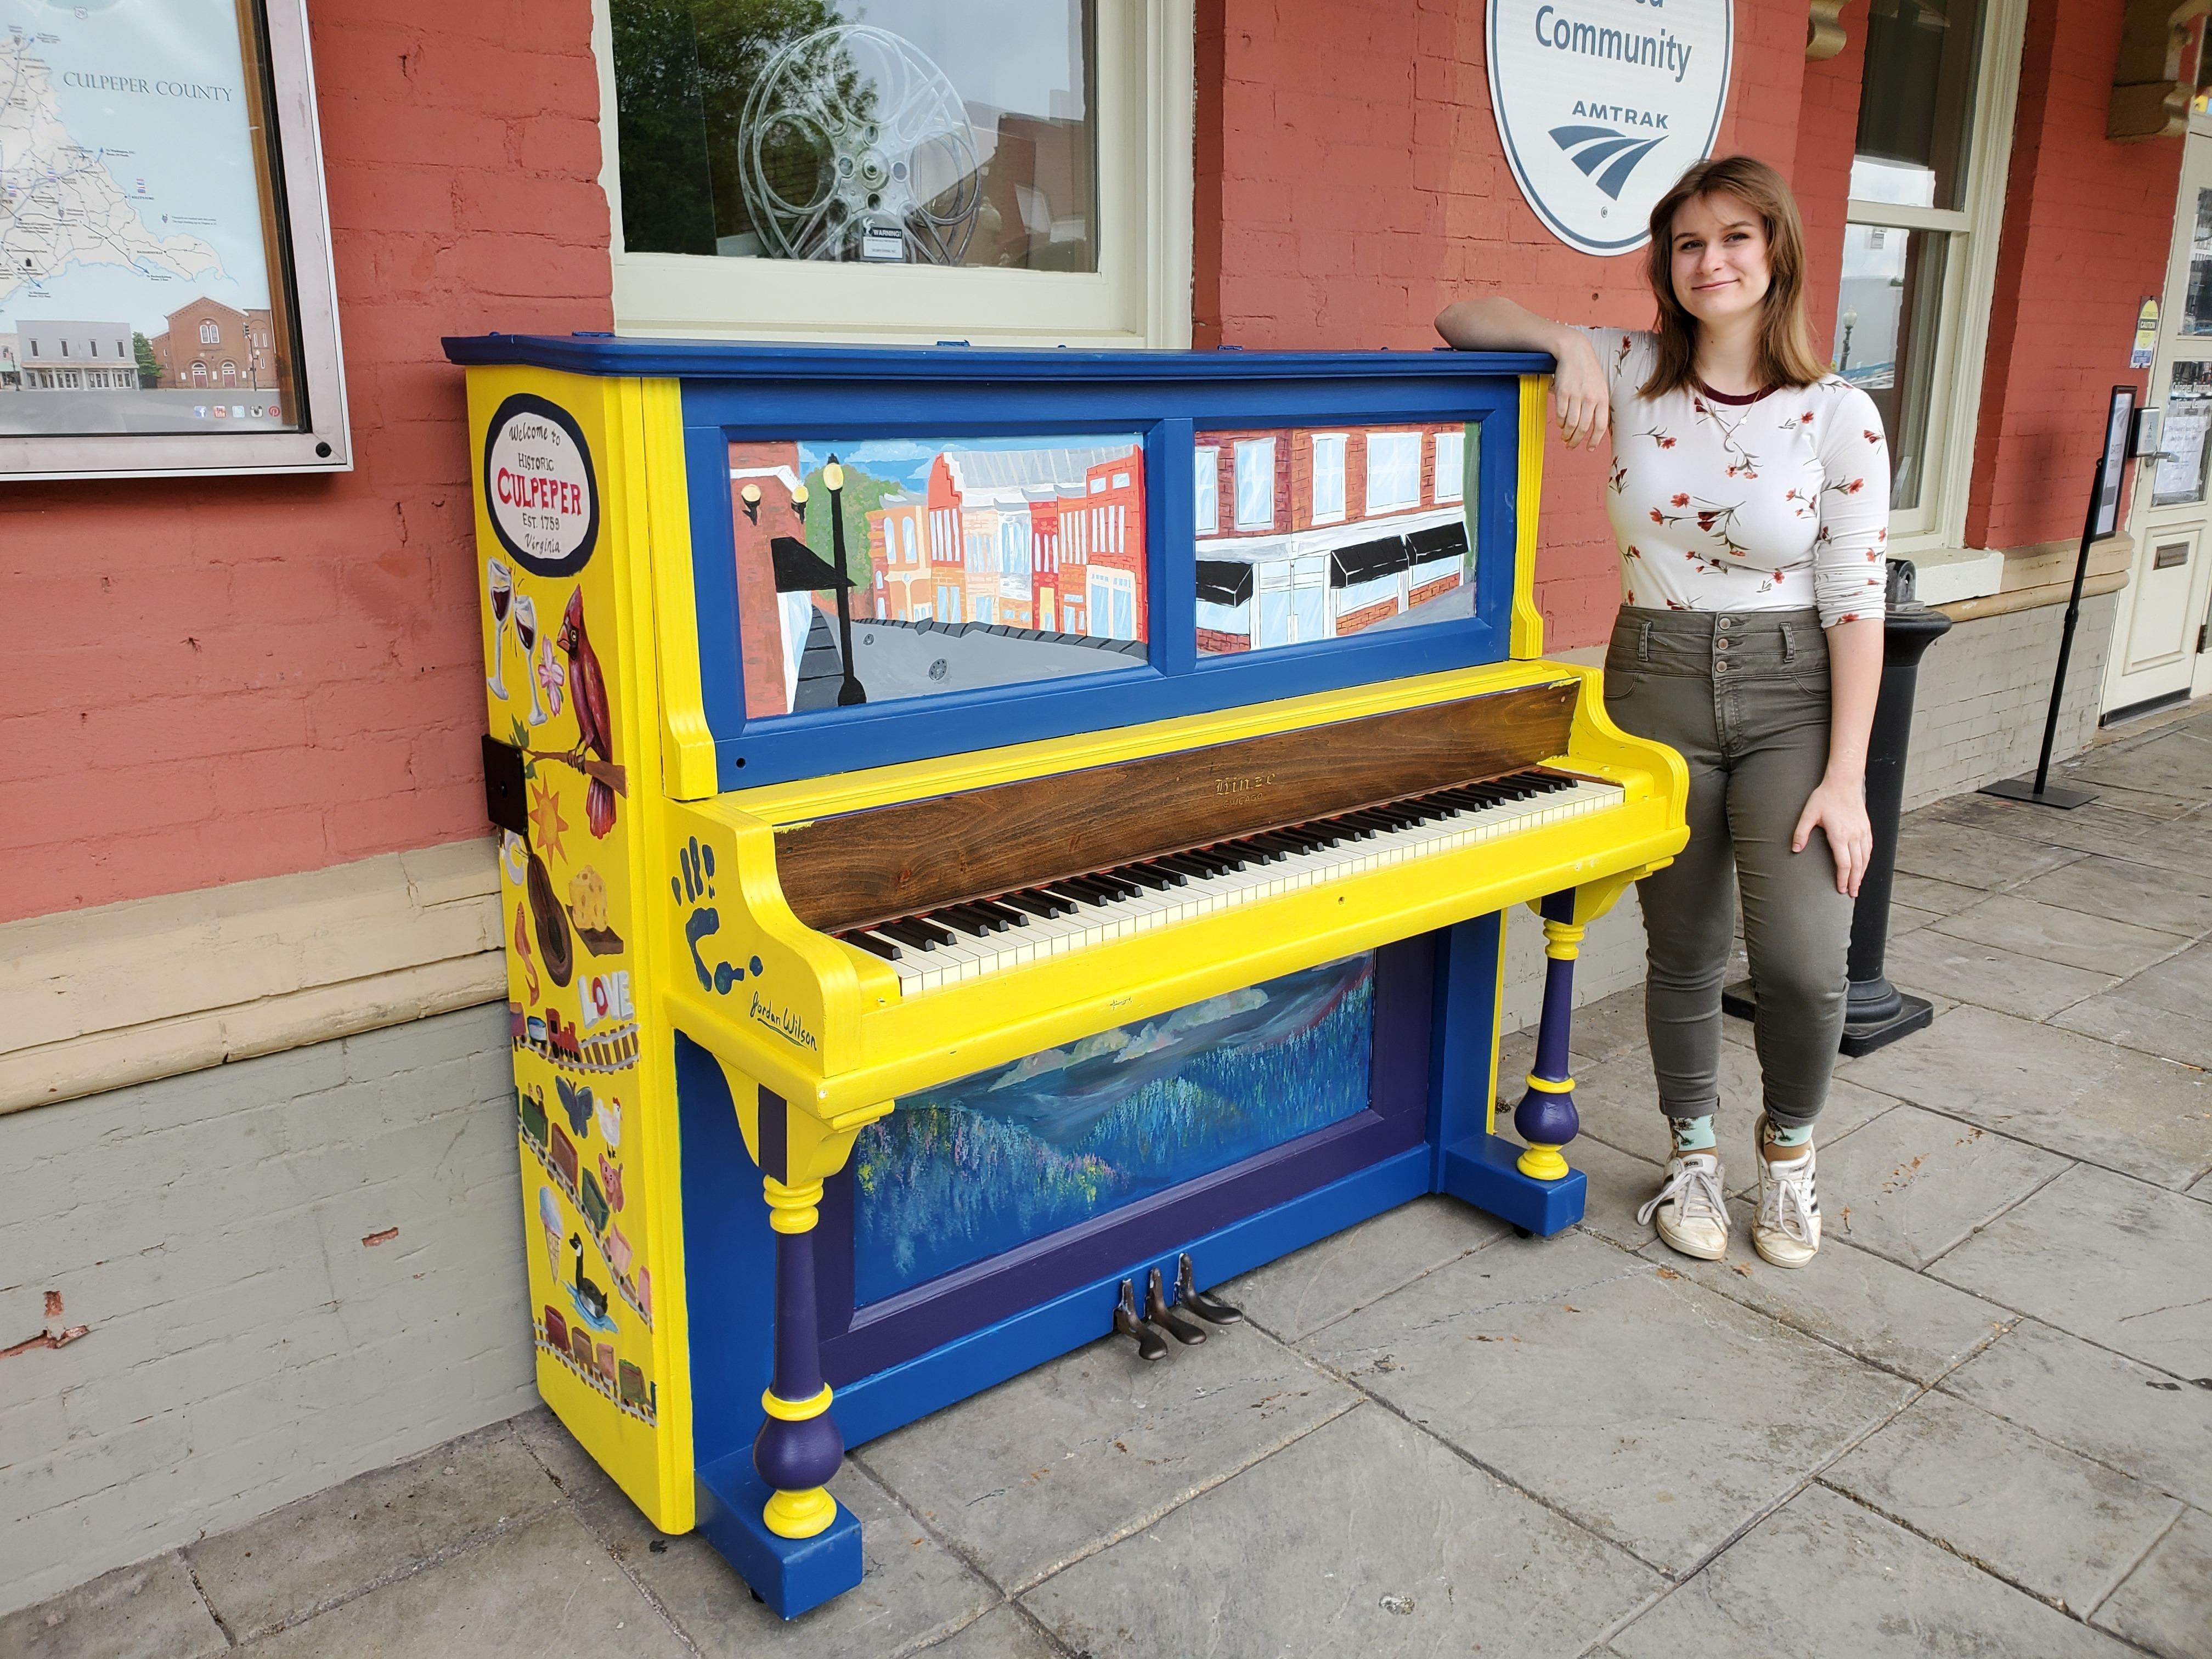 Outdoor piano brings music downtown in Virginia community image